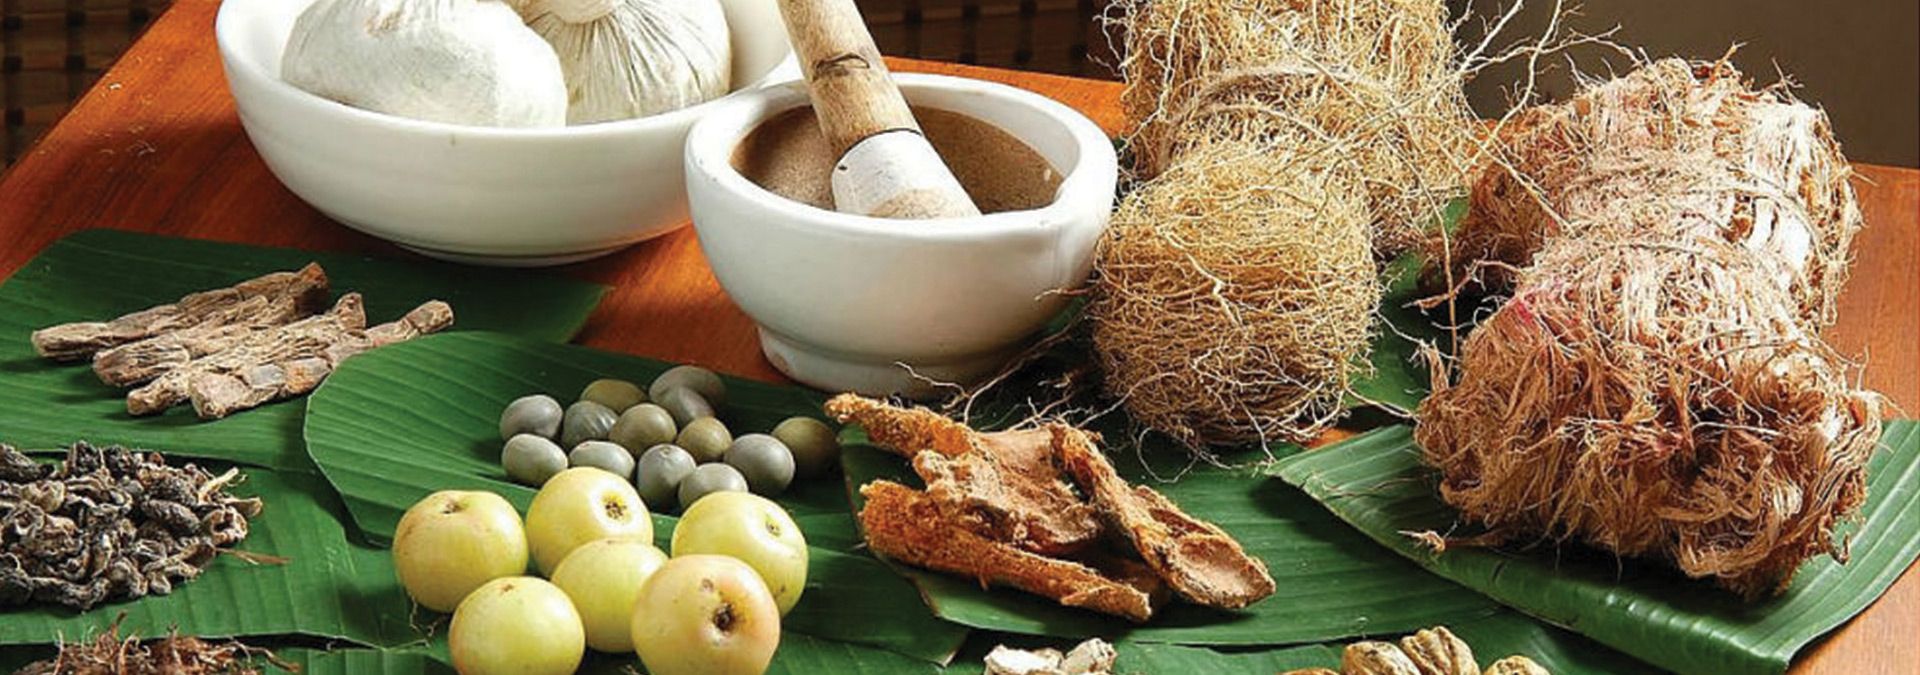 Ayurvedic and herbal products banner  